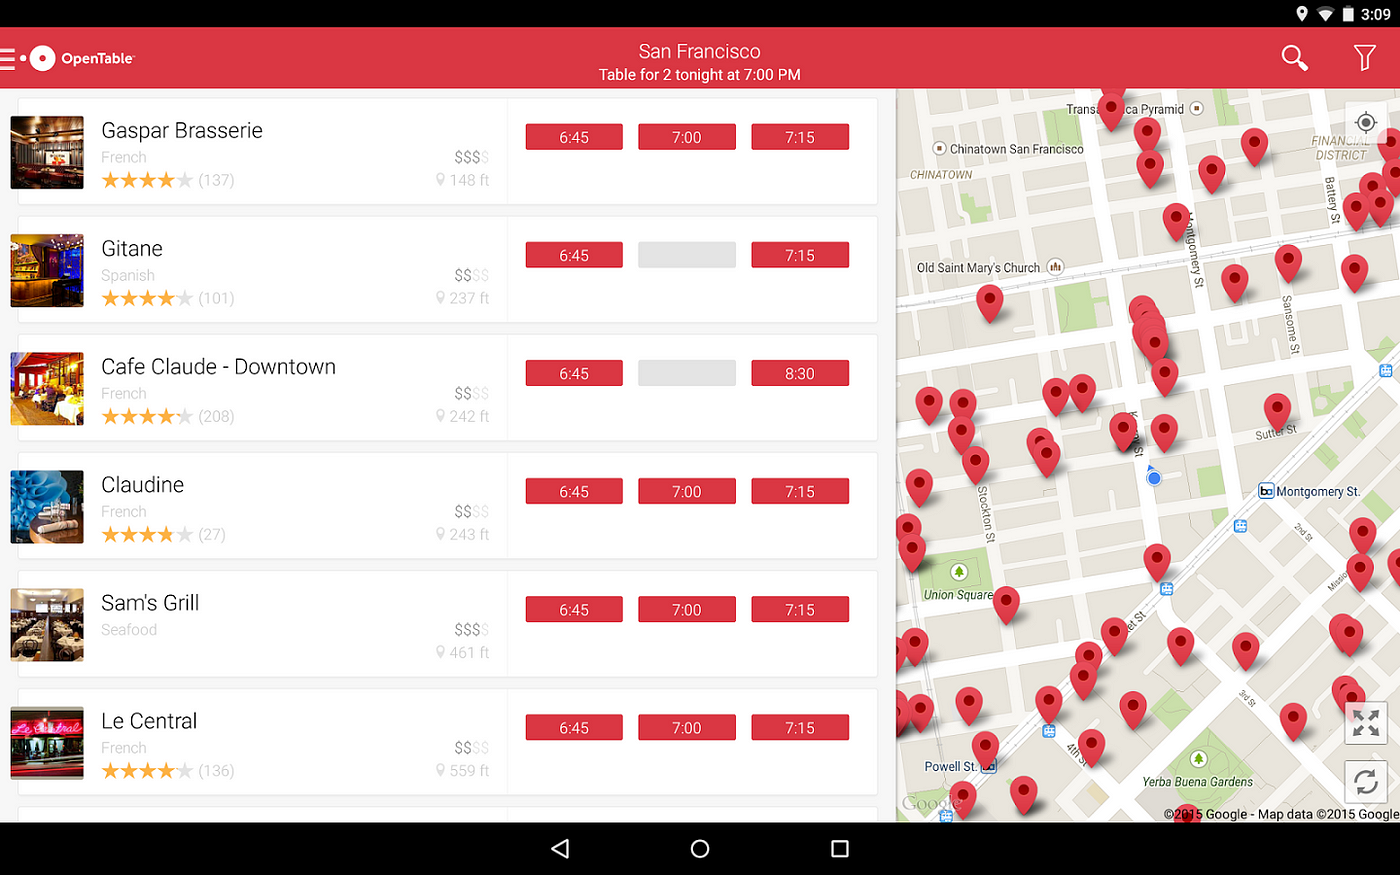 Develop a restaurant reservation system app like opentable by Harkirpanjit